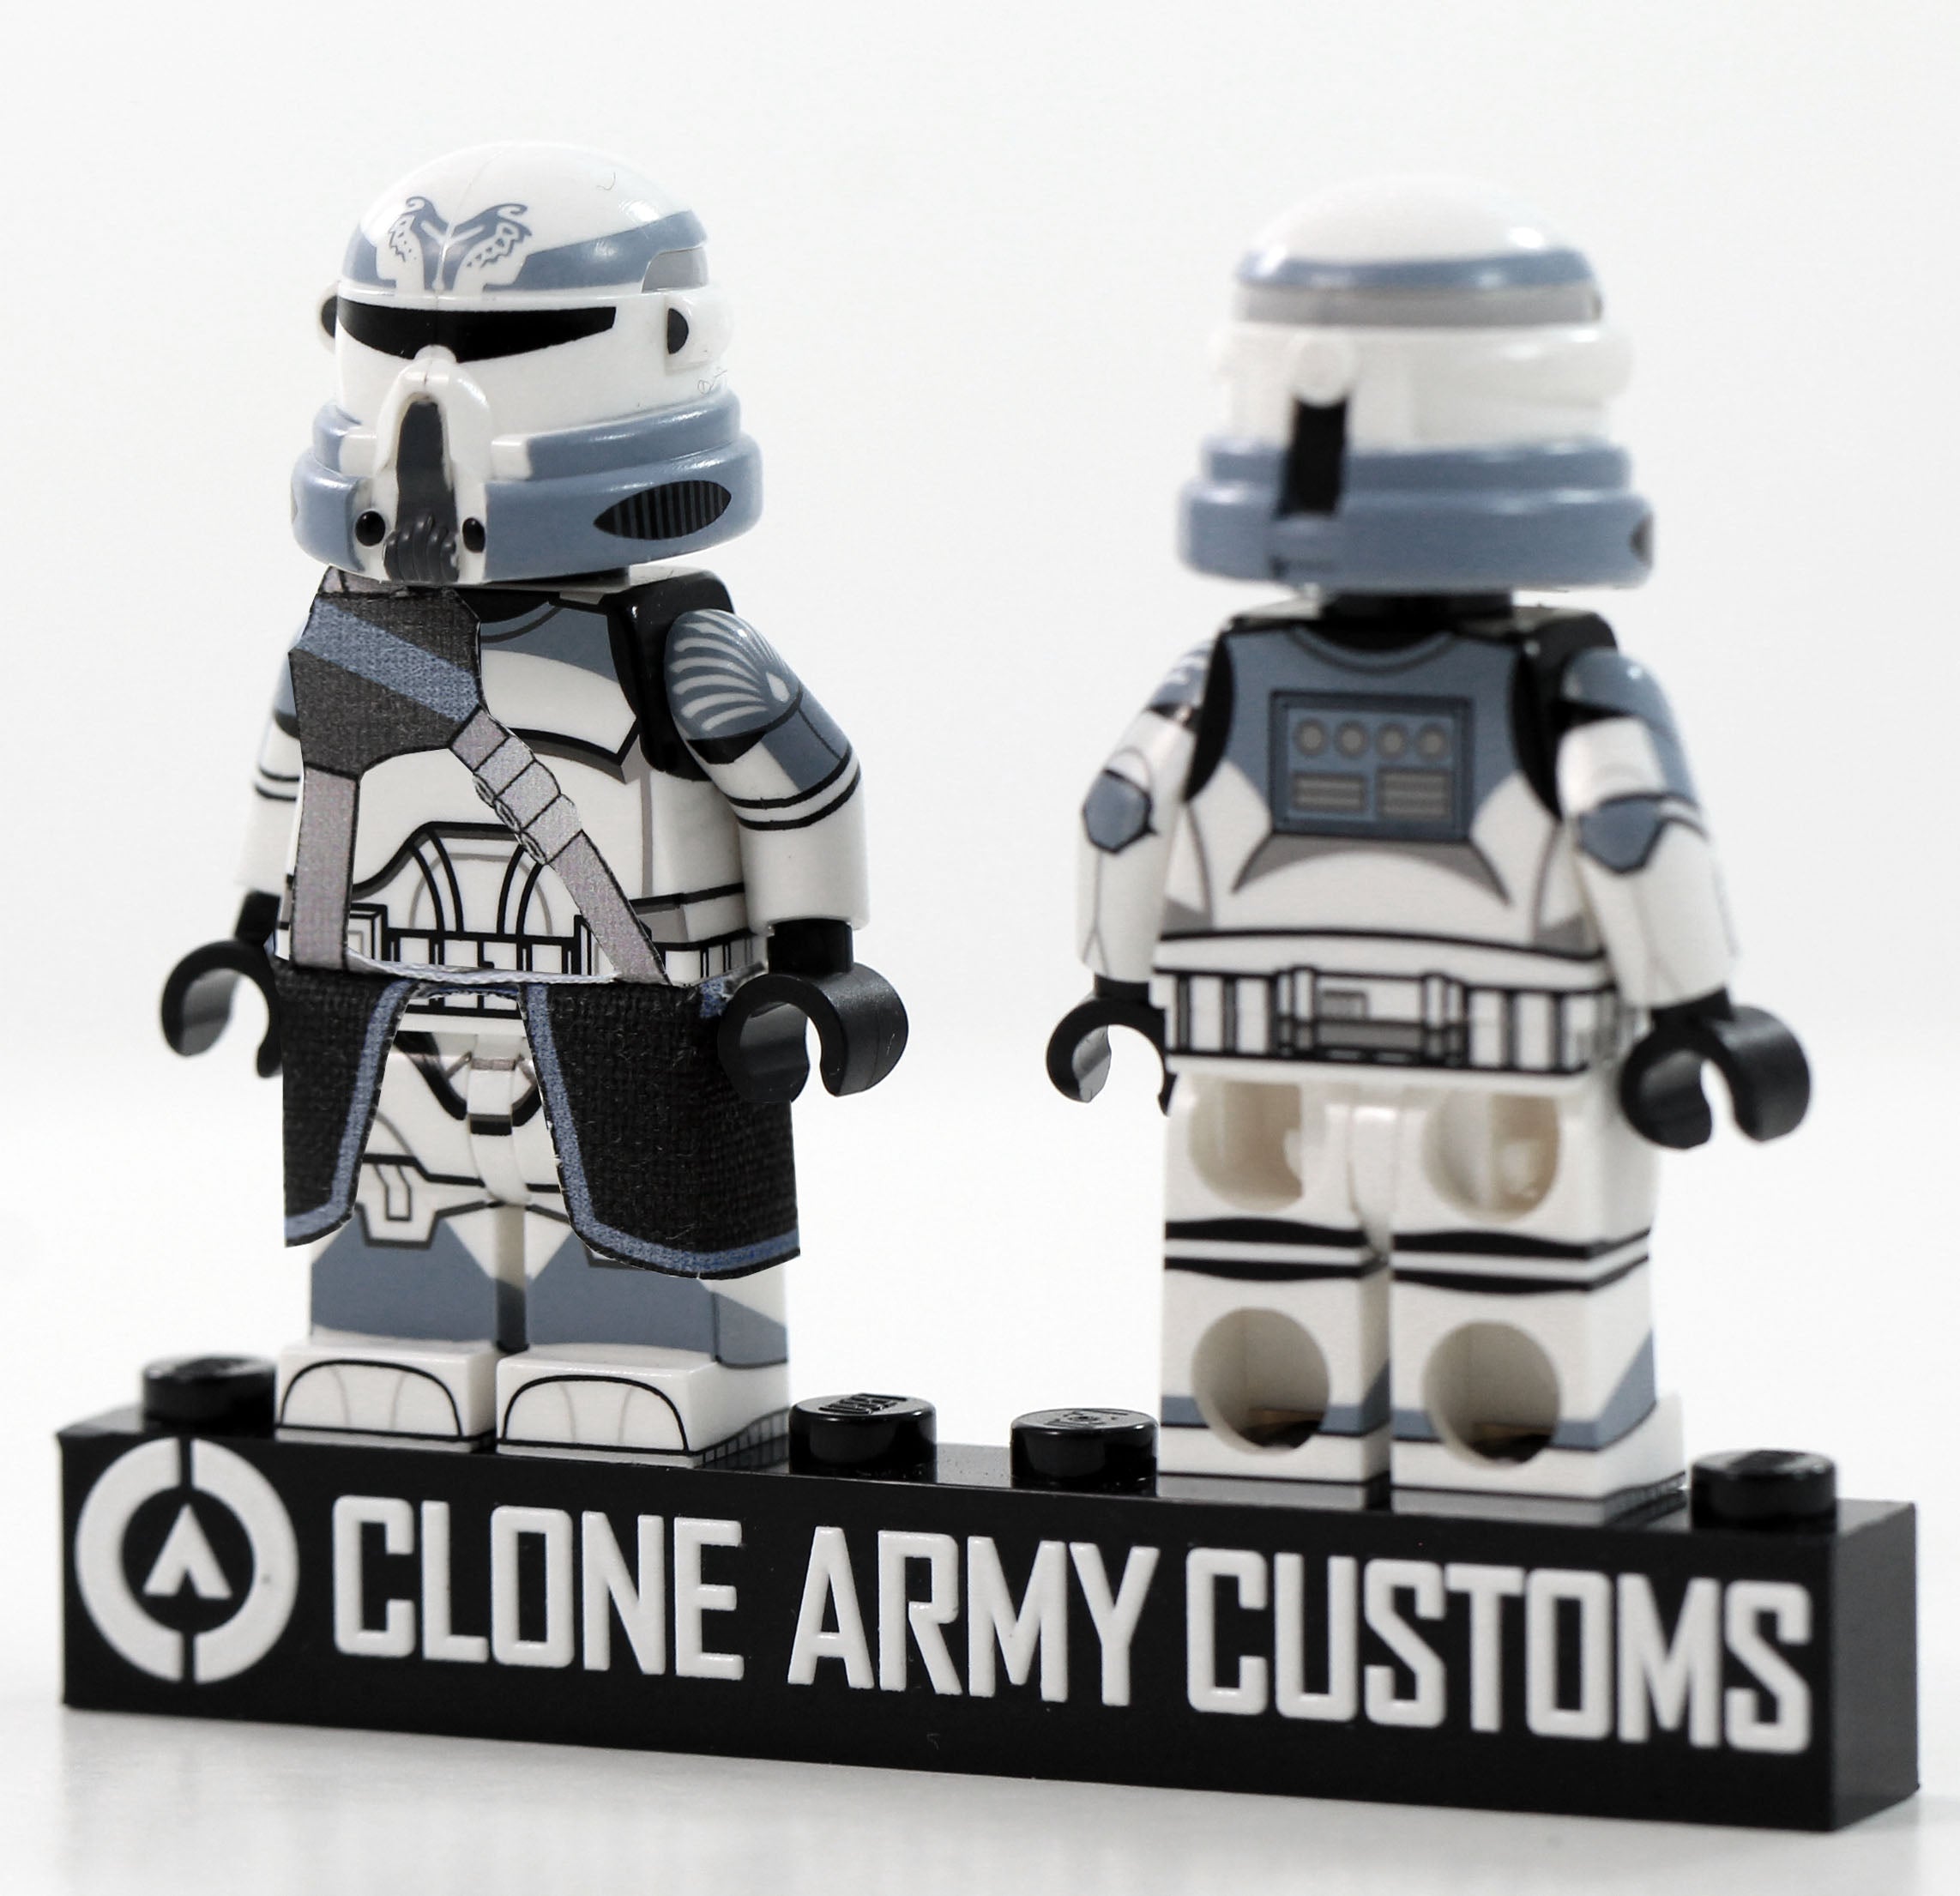 Airborne Wolfpack Trooper Star Wars Minifig - Clone Army Customs (CAC)